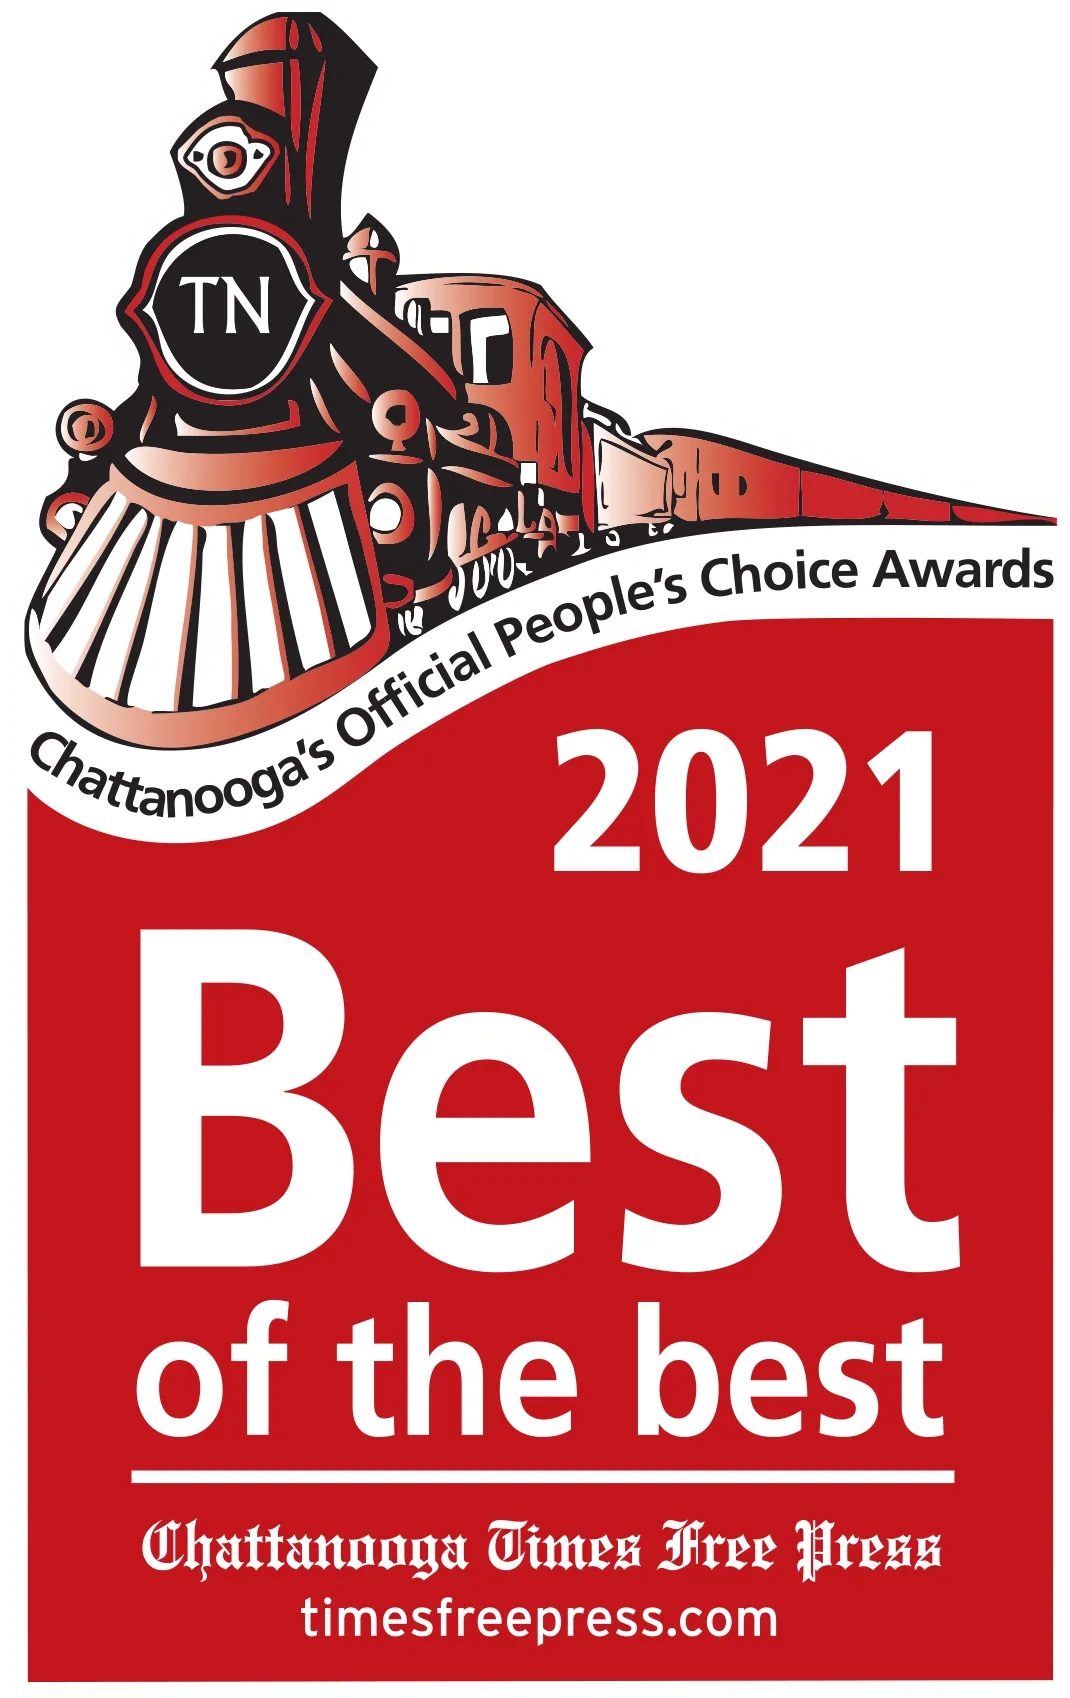 Chattanooga Times Free Press 2021 best of the best badge